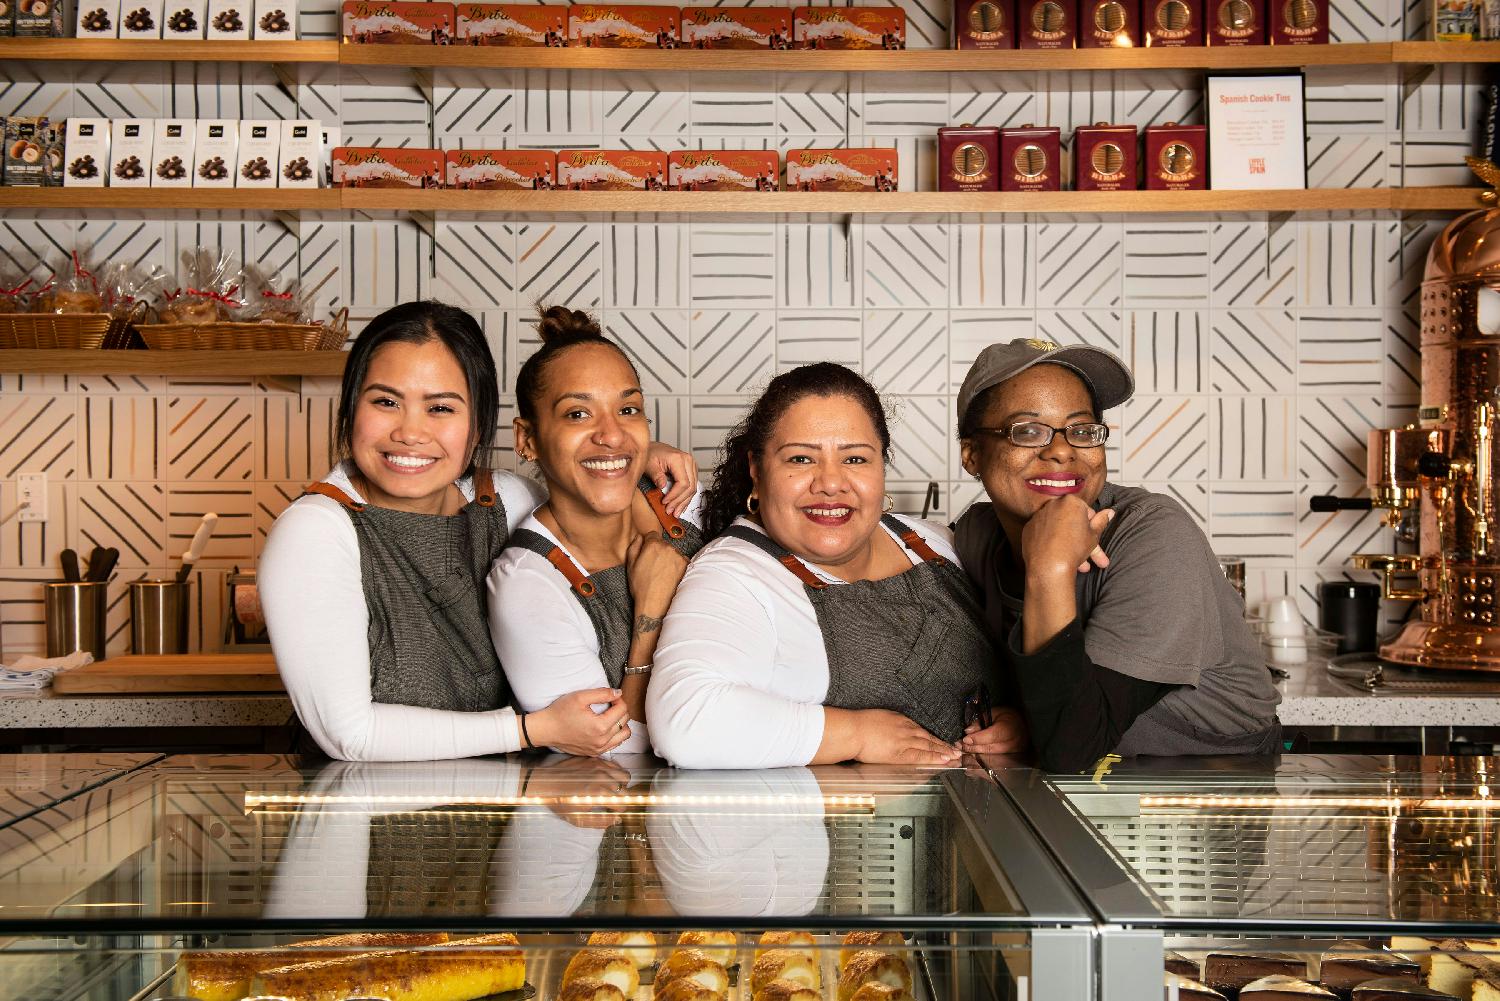 Pasteleria staff at Mercado Little Spain in NYC.